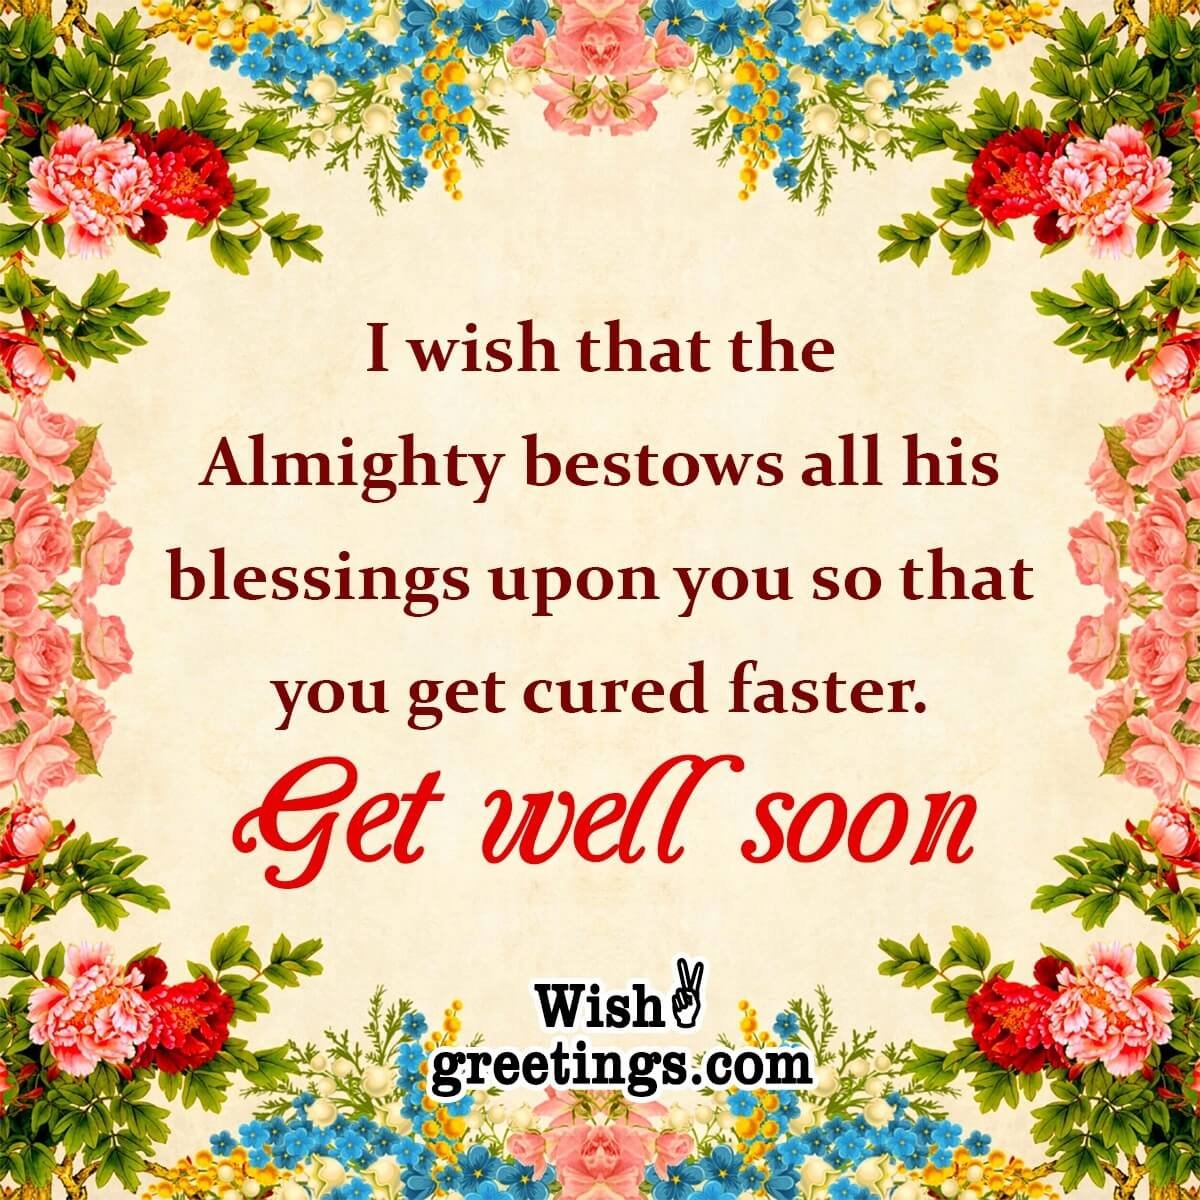 religious-get-well-soon-messages